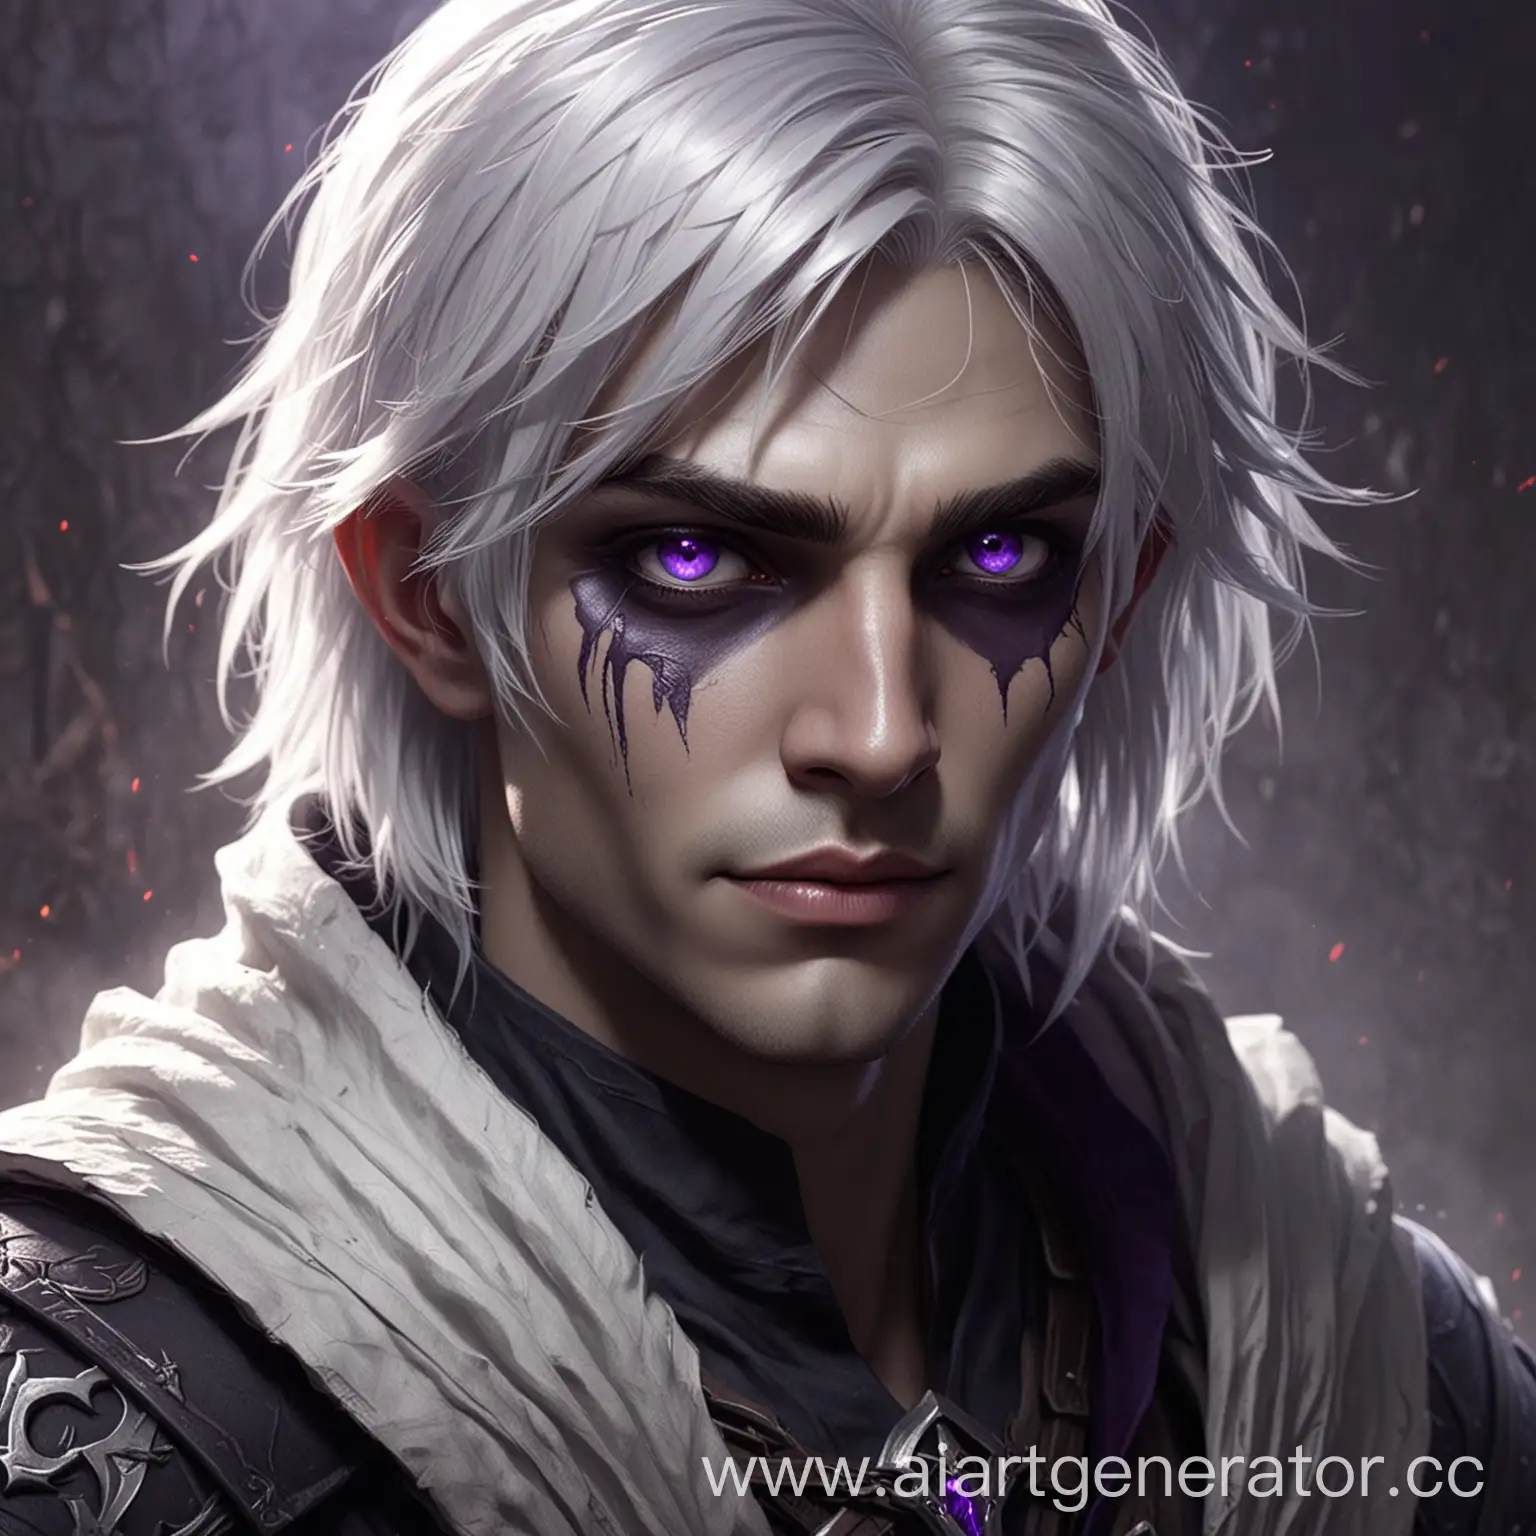 The drow is a young guy, a rogue with purple eyes and short white hair